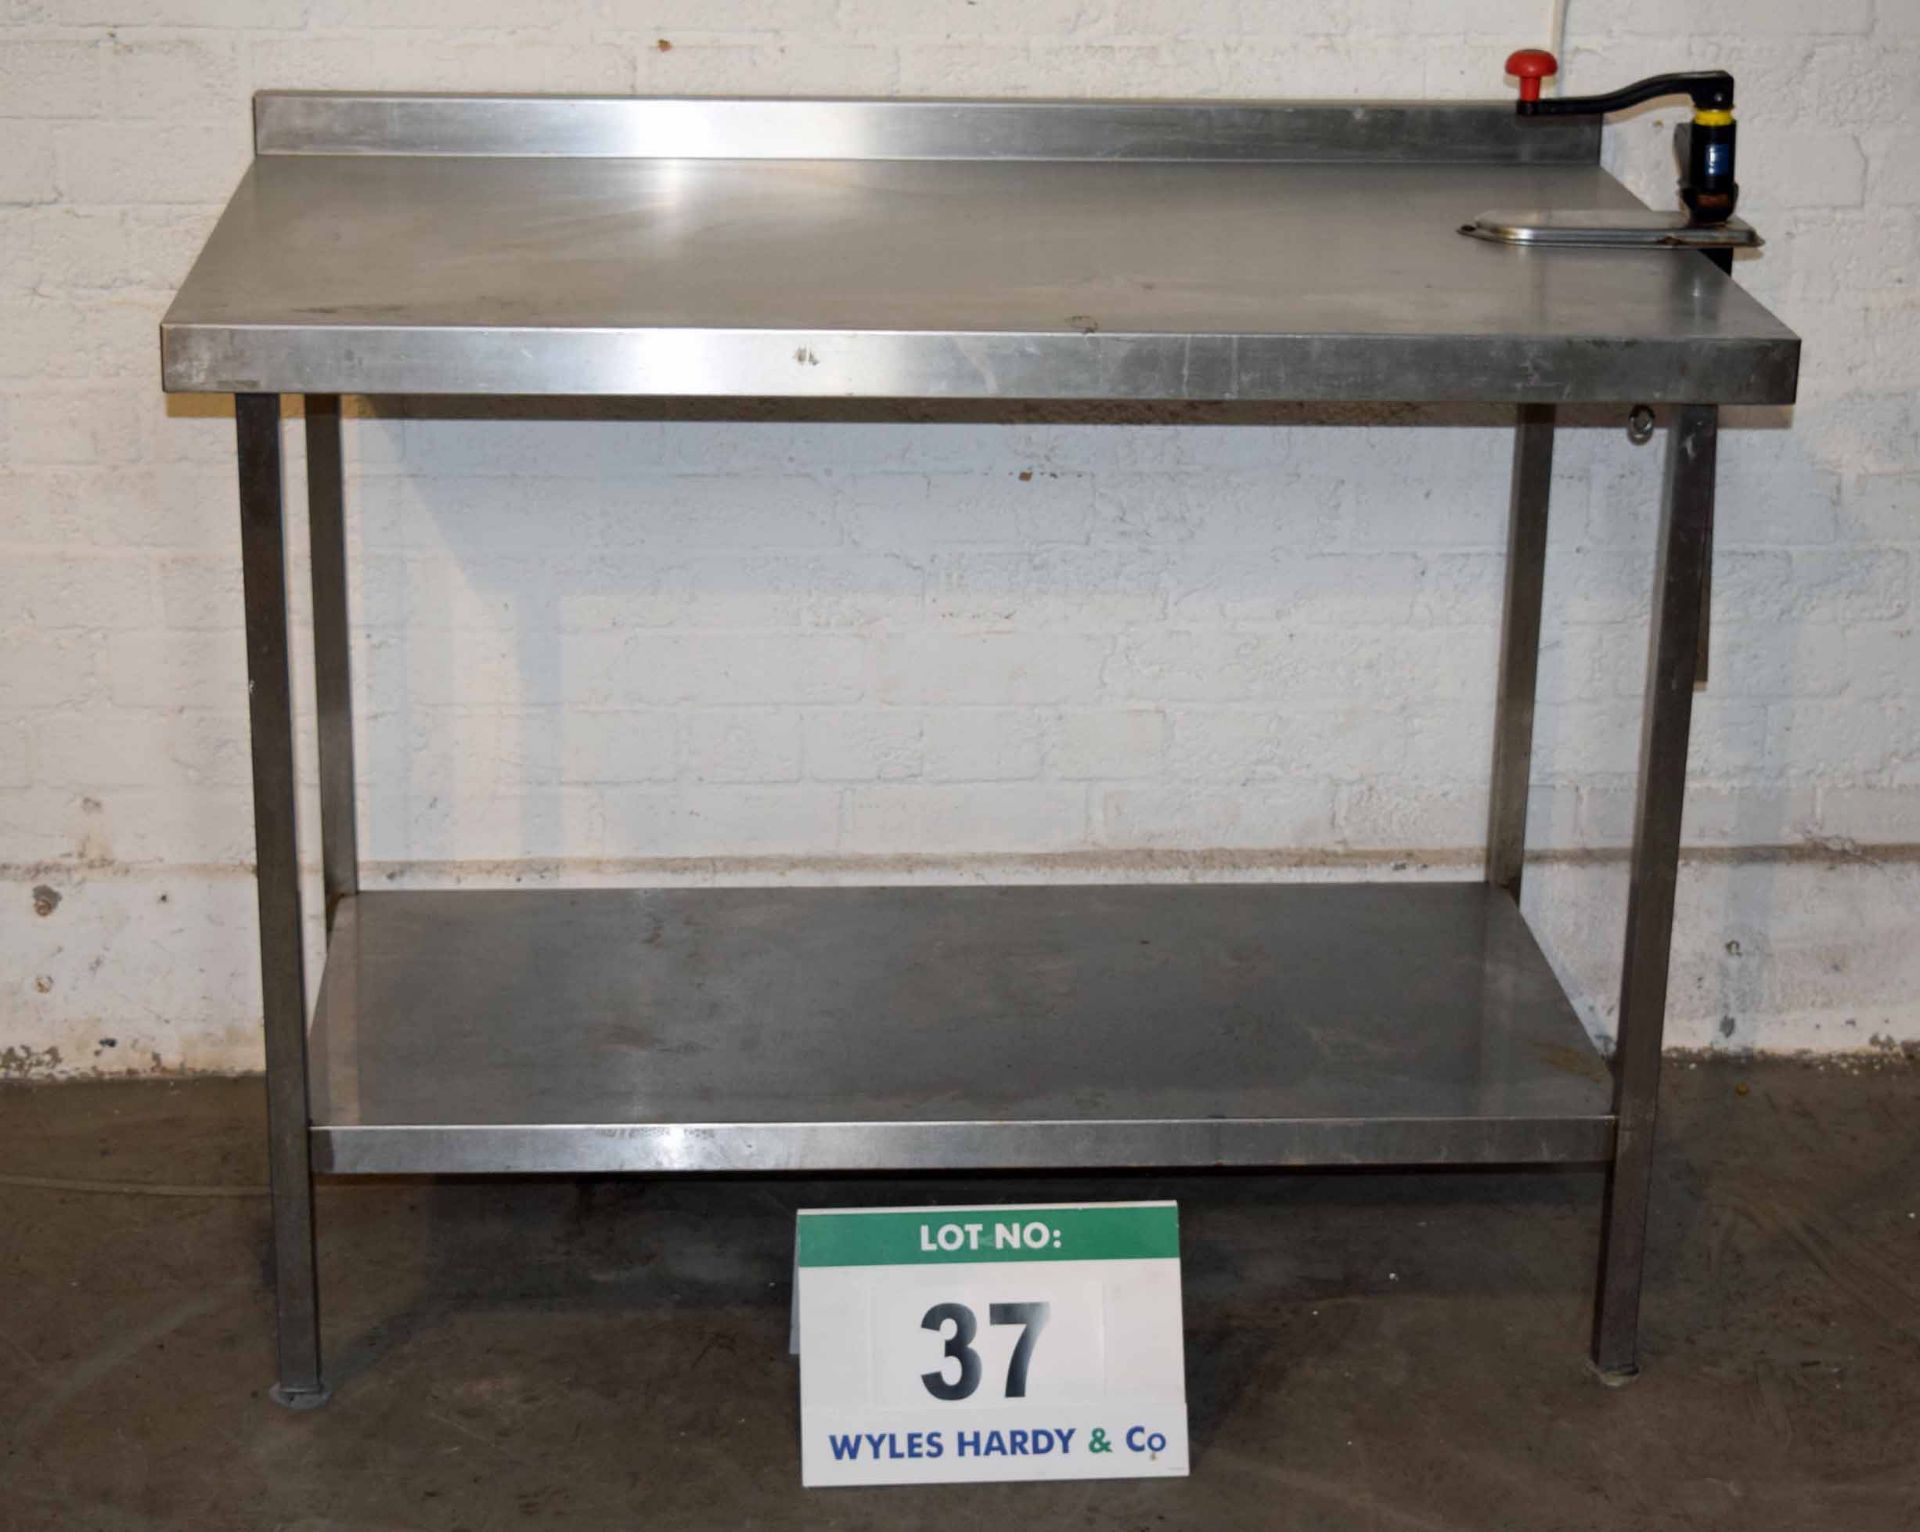 A 1200mm x 700mm Stainless Steel Preparation Table with fitted BONZER Manual Tin Opener